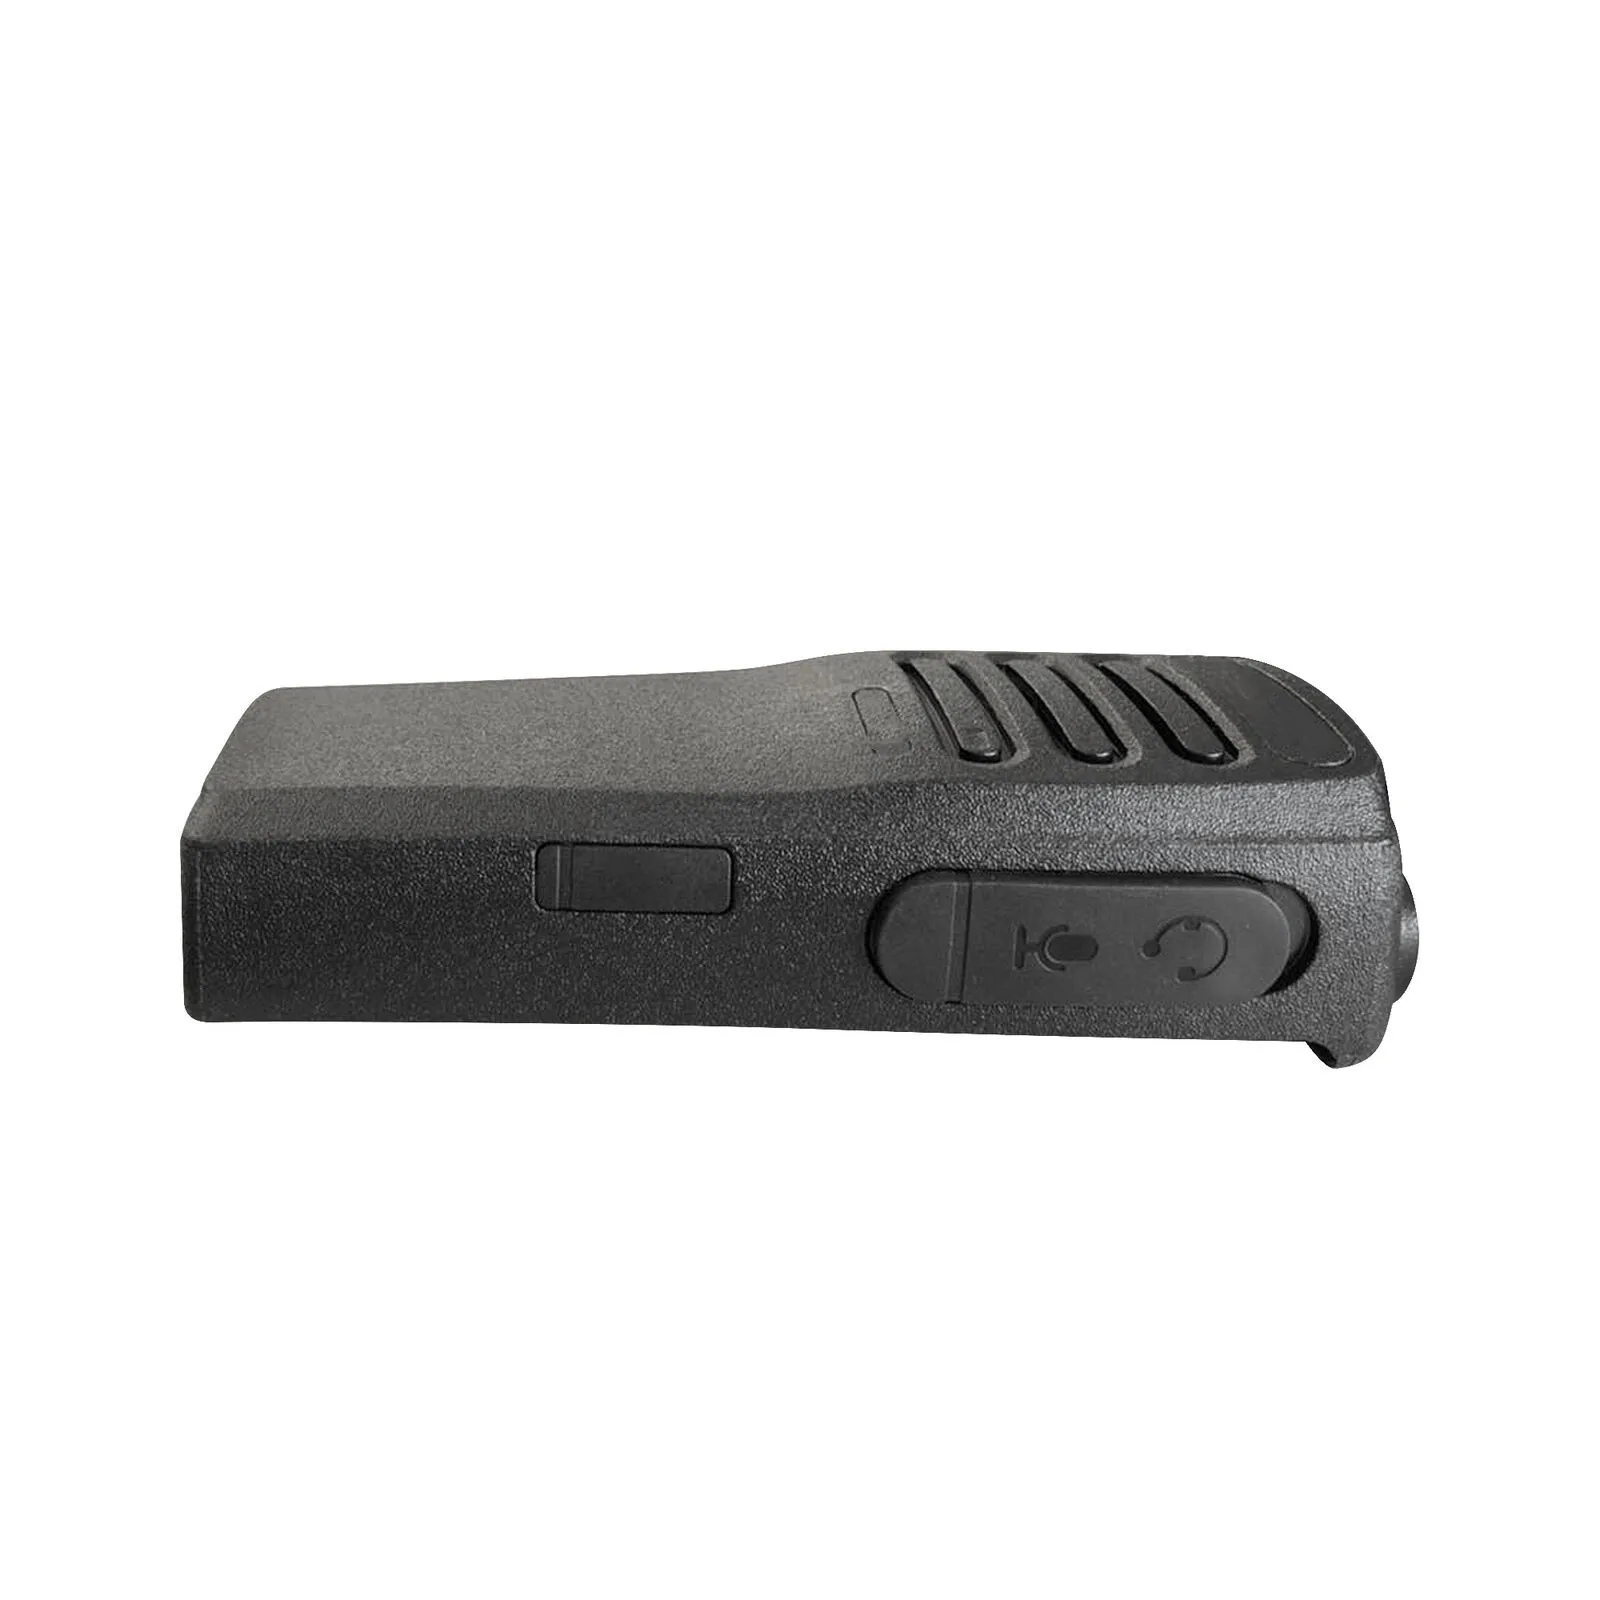 Black Walkie Replacement Repair Housing Cover Case with Speaker Fit For CP200D DEP450 XIR P3688 DP1400 Two Way Radio